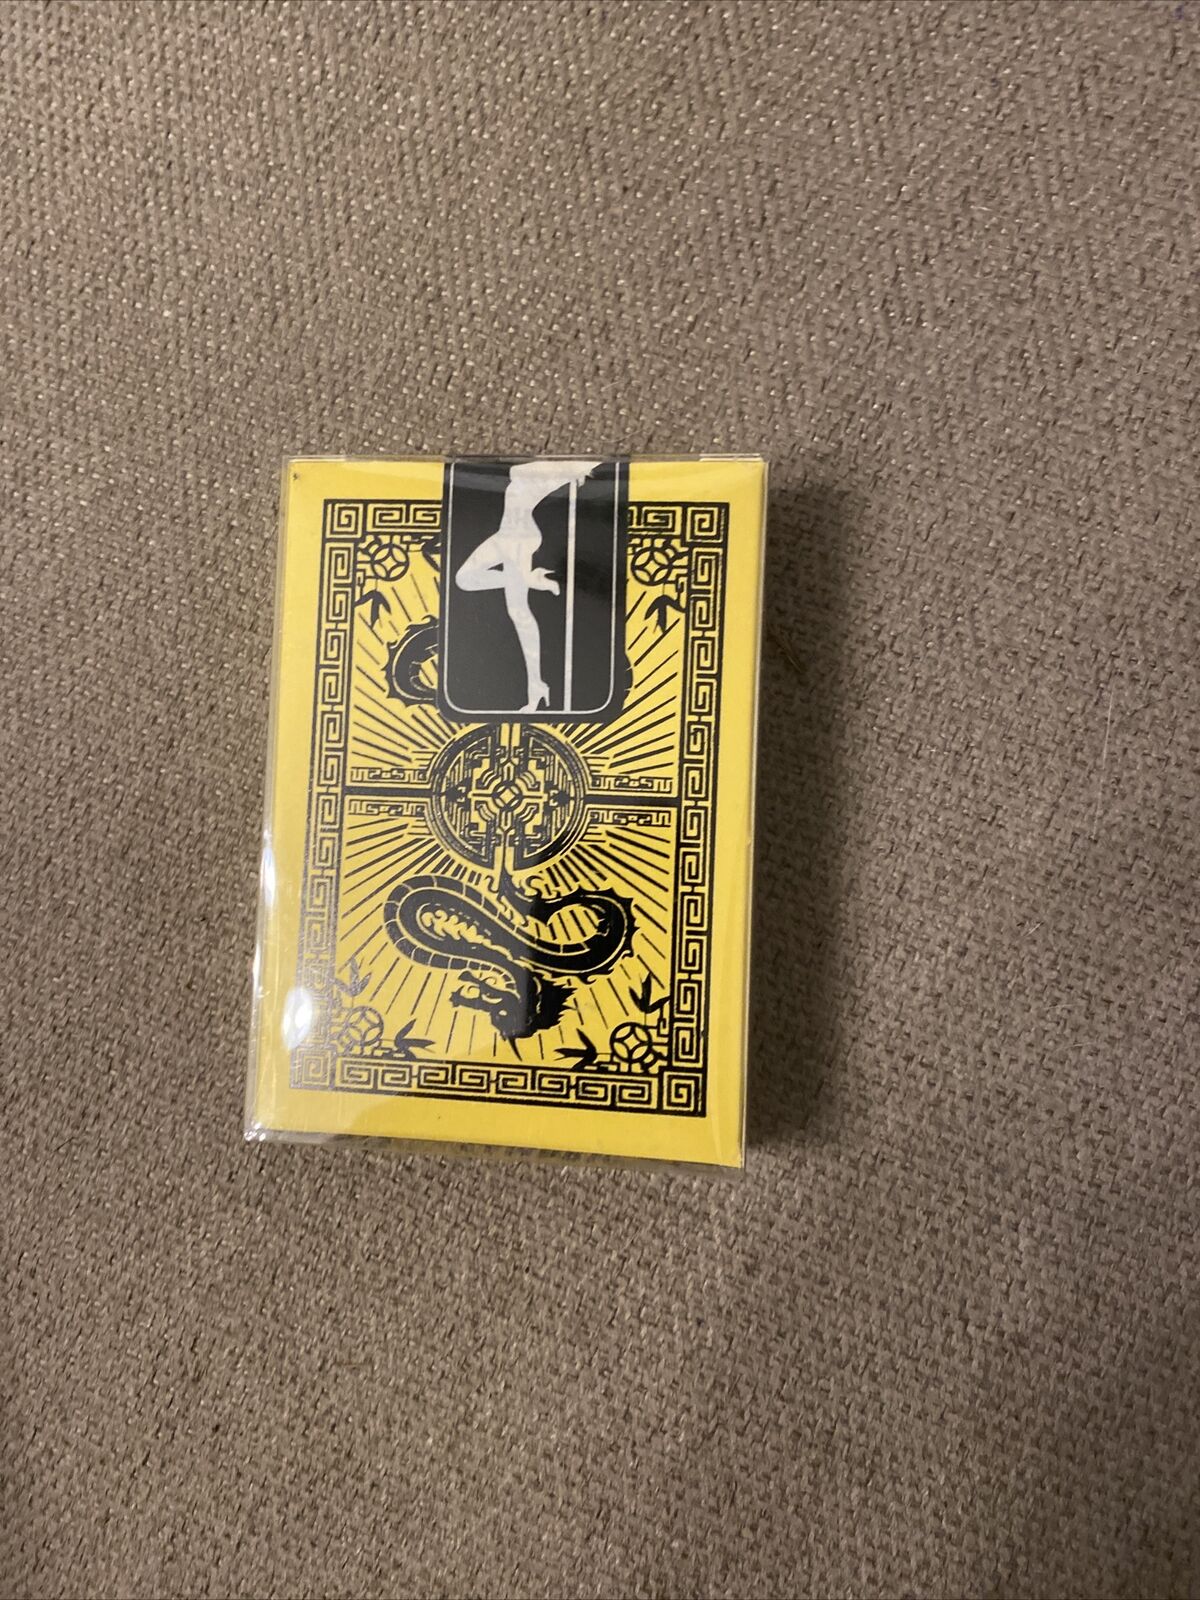 Ace Fulton's Chinatown Playing Cards  - Game of Death Stripper Deck Rare